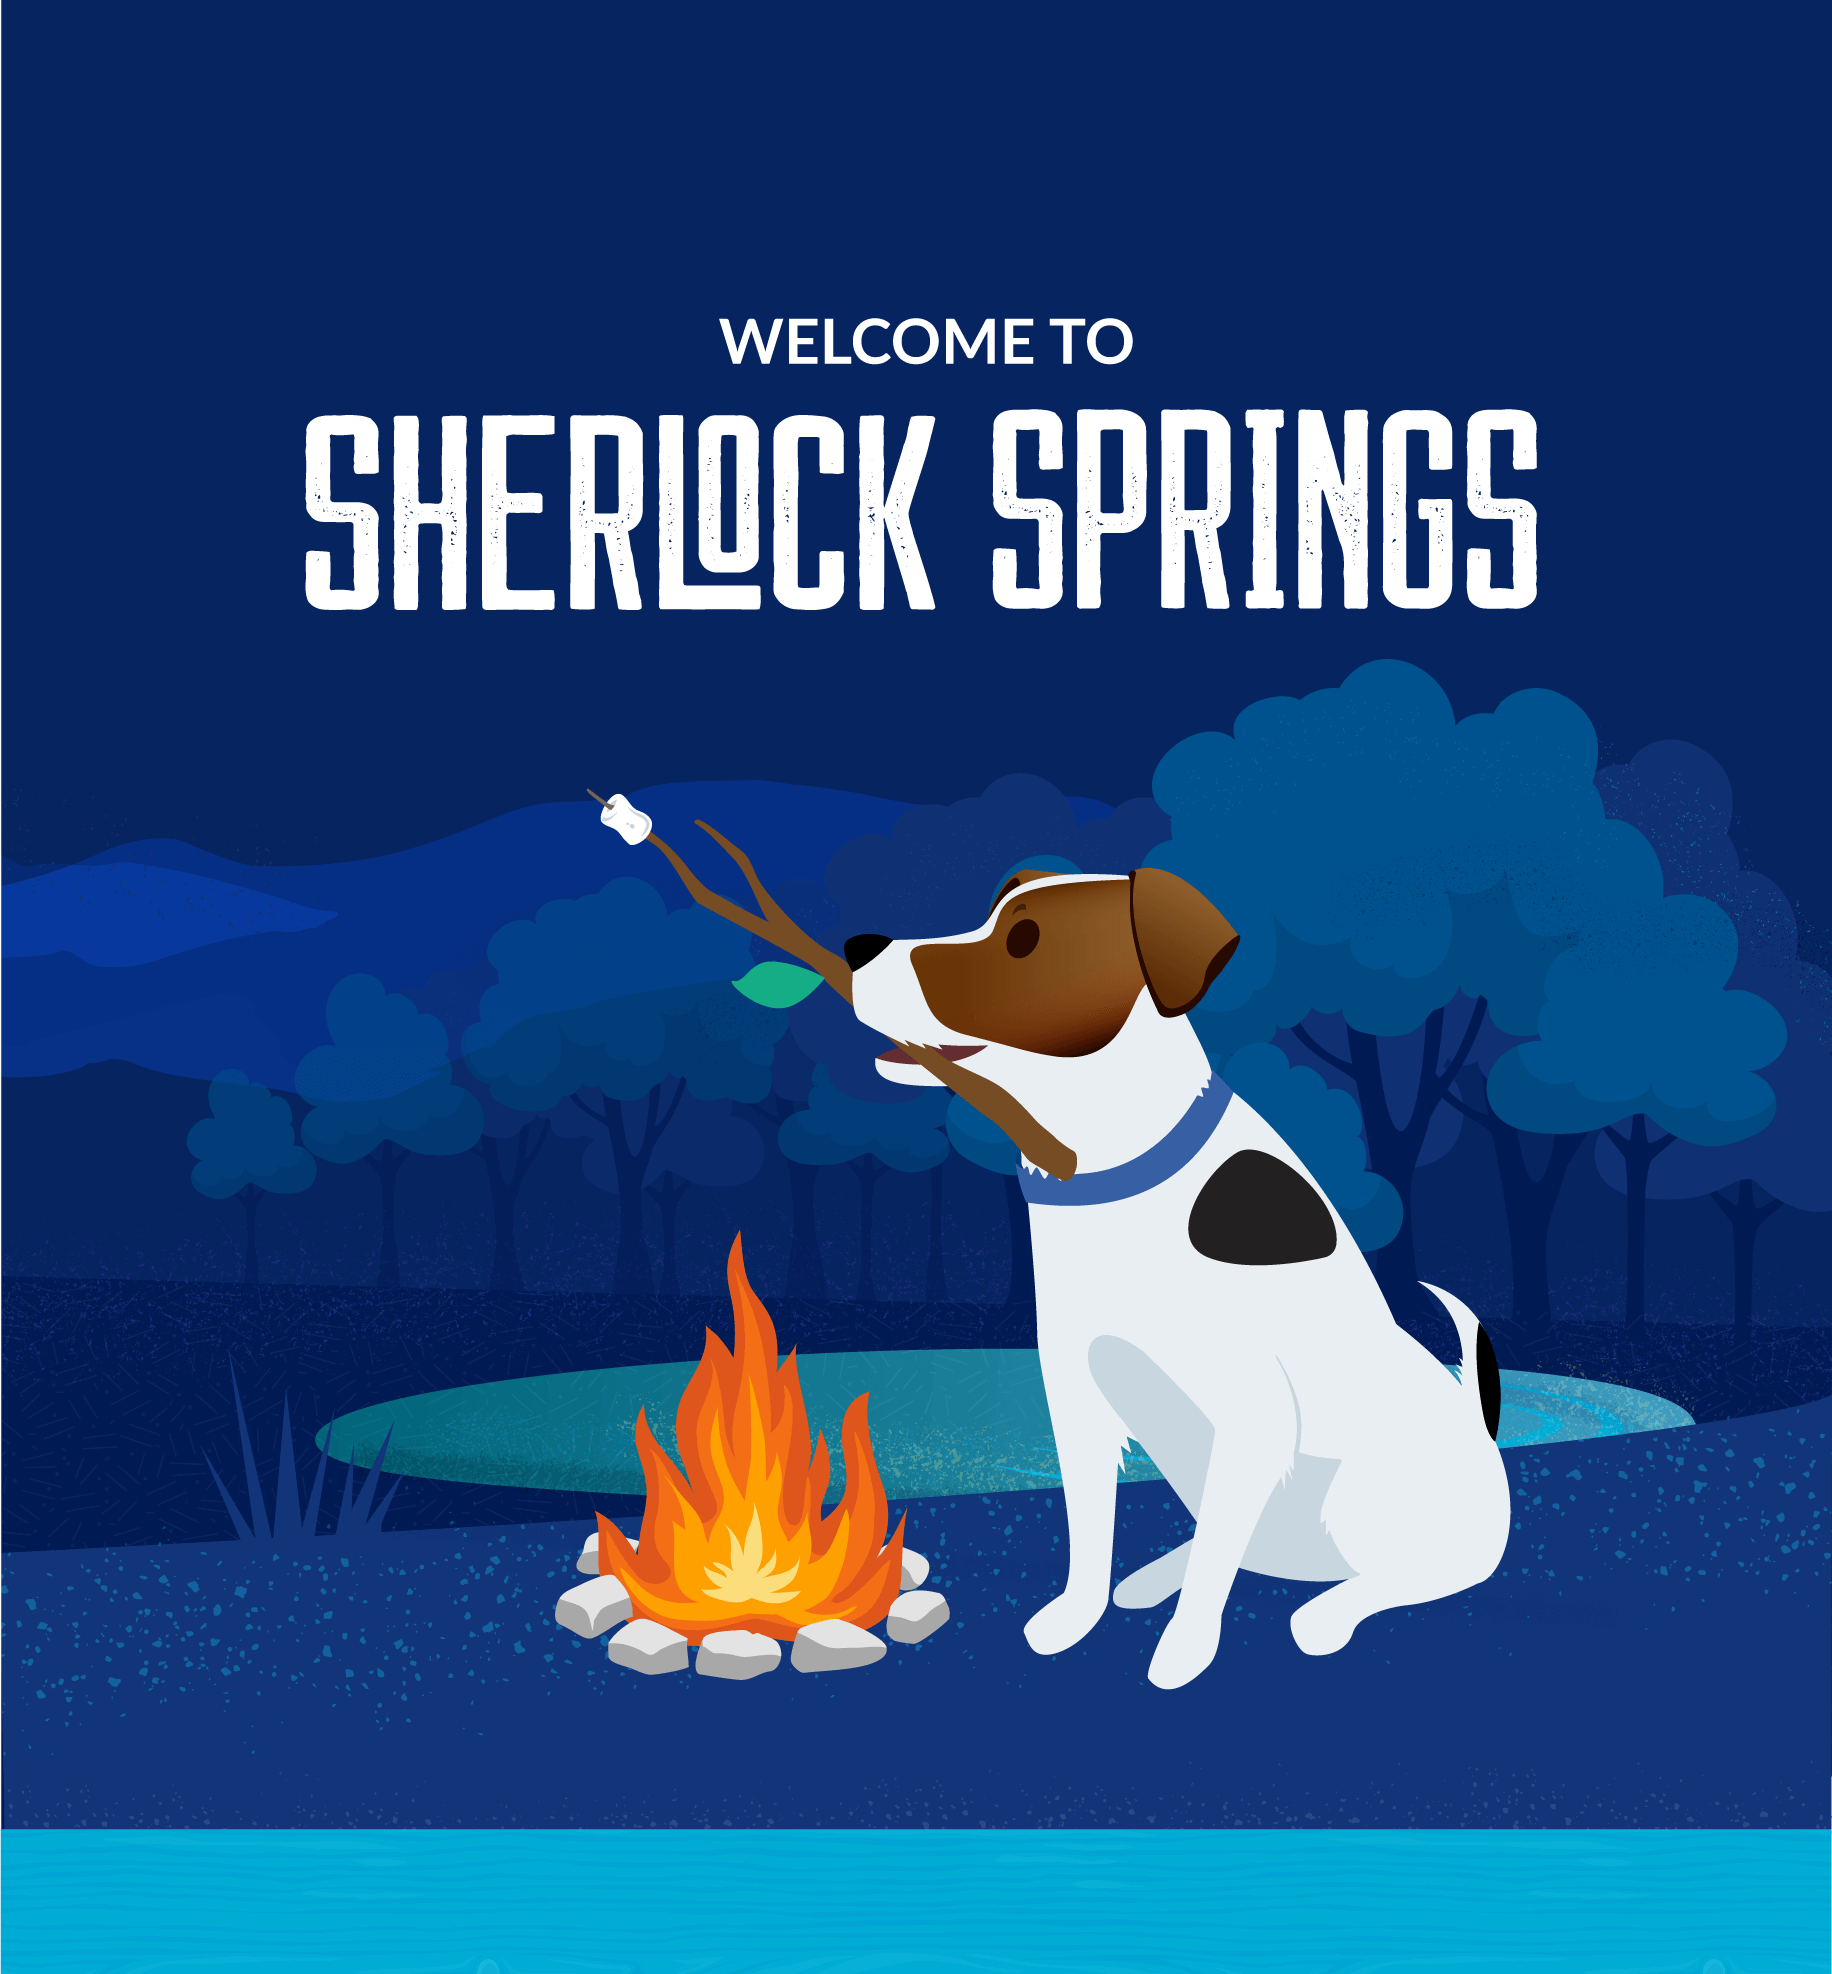 Sherlock Springs Home Page Header Image for Mobile